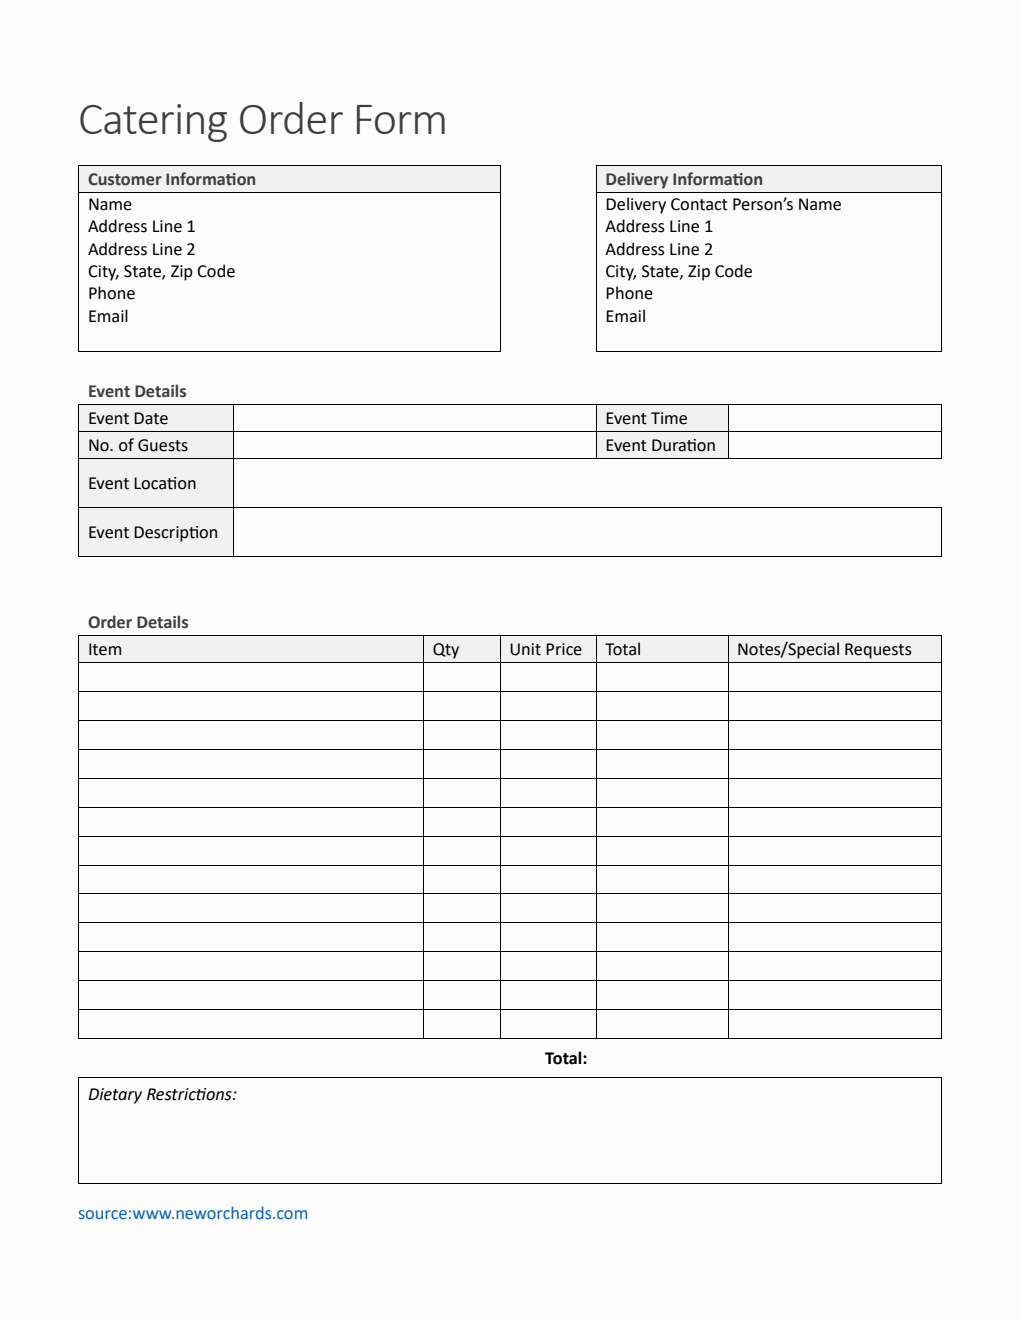 Basic Catering Order Form Template in Word